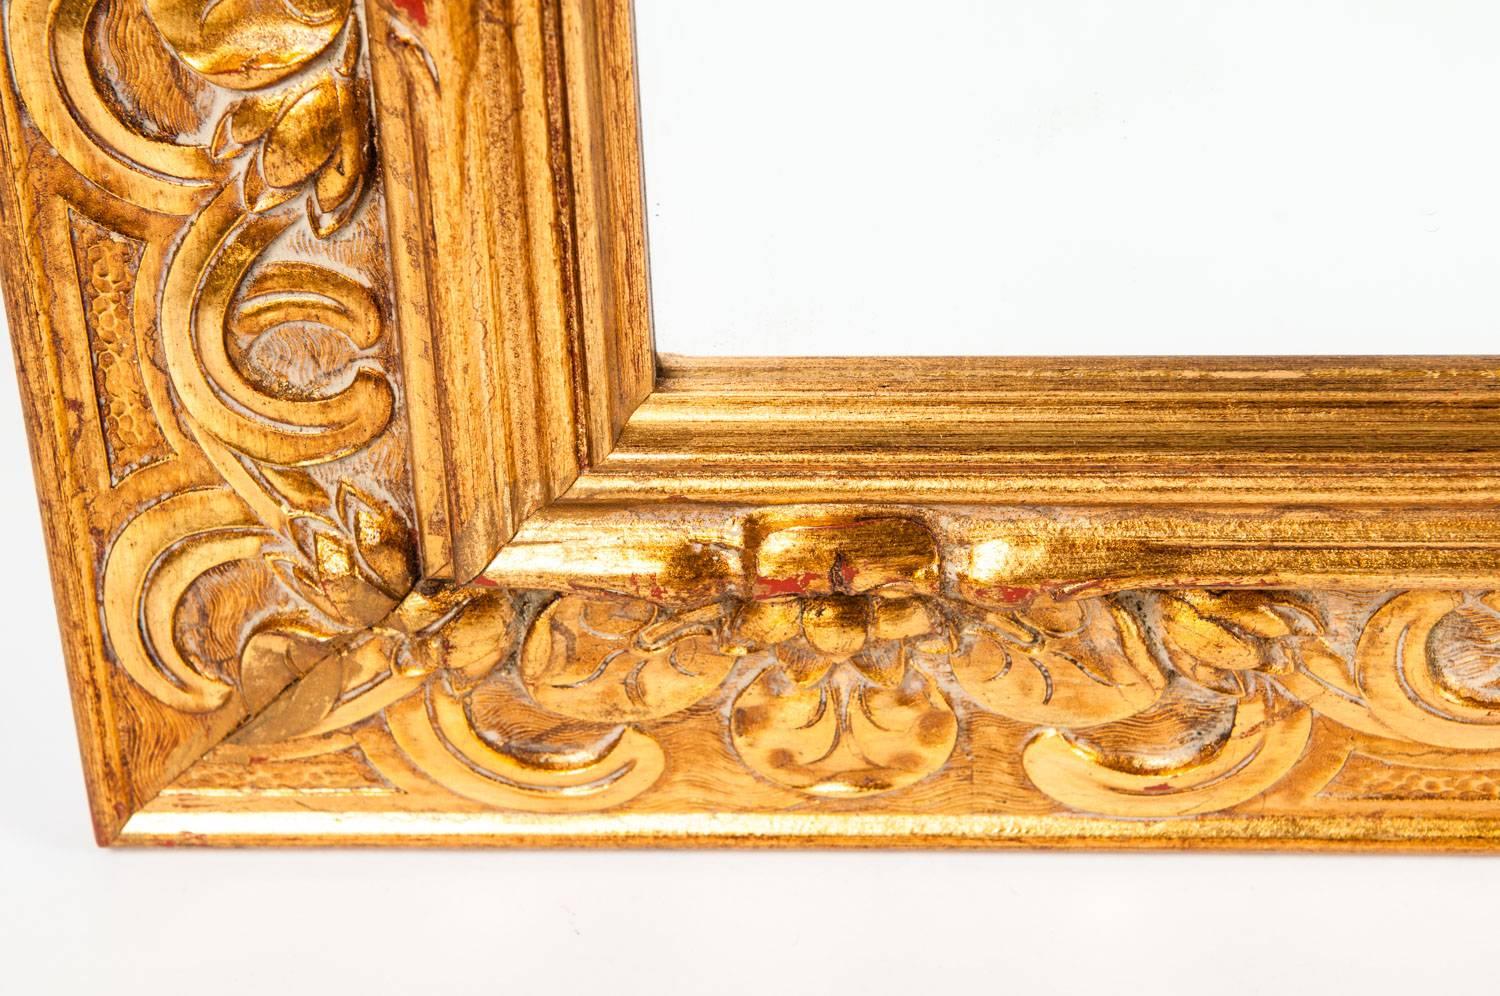 Large vintage Italian gilded wood framed hanging bevelled wall mirror. The mirror is in excellent vintage condition. The mirror measure about 58 inches length x 34 inches width.